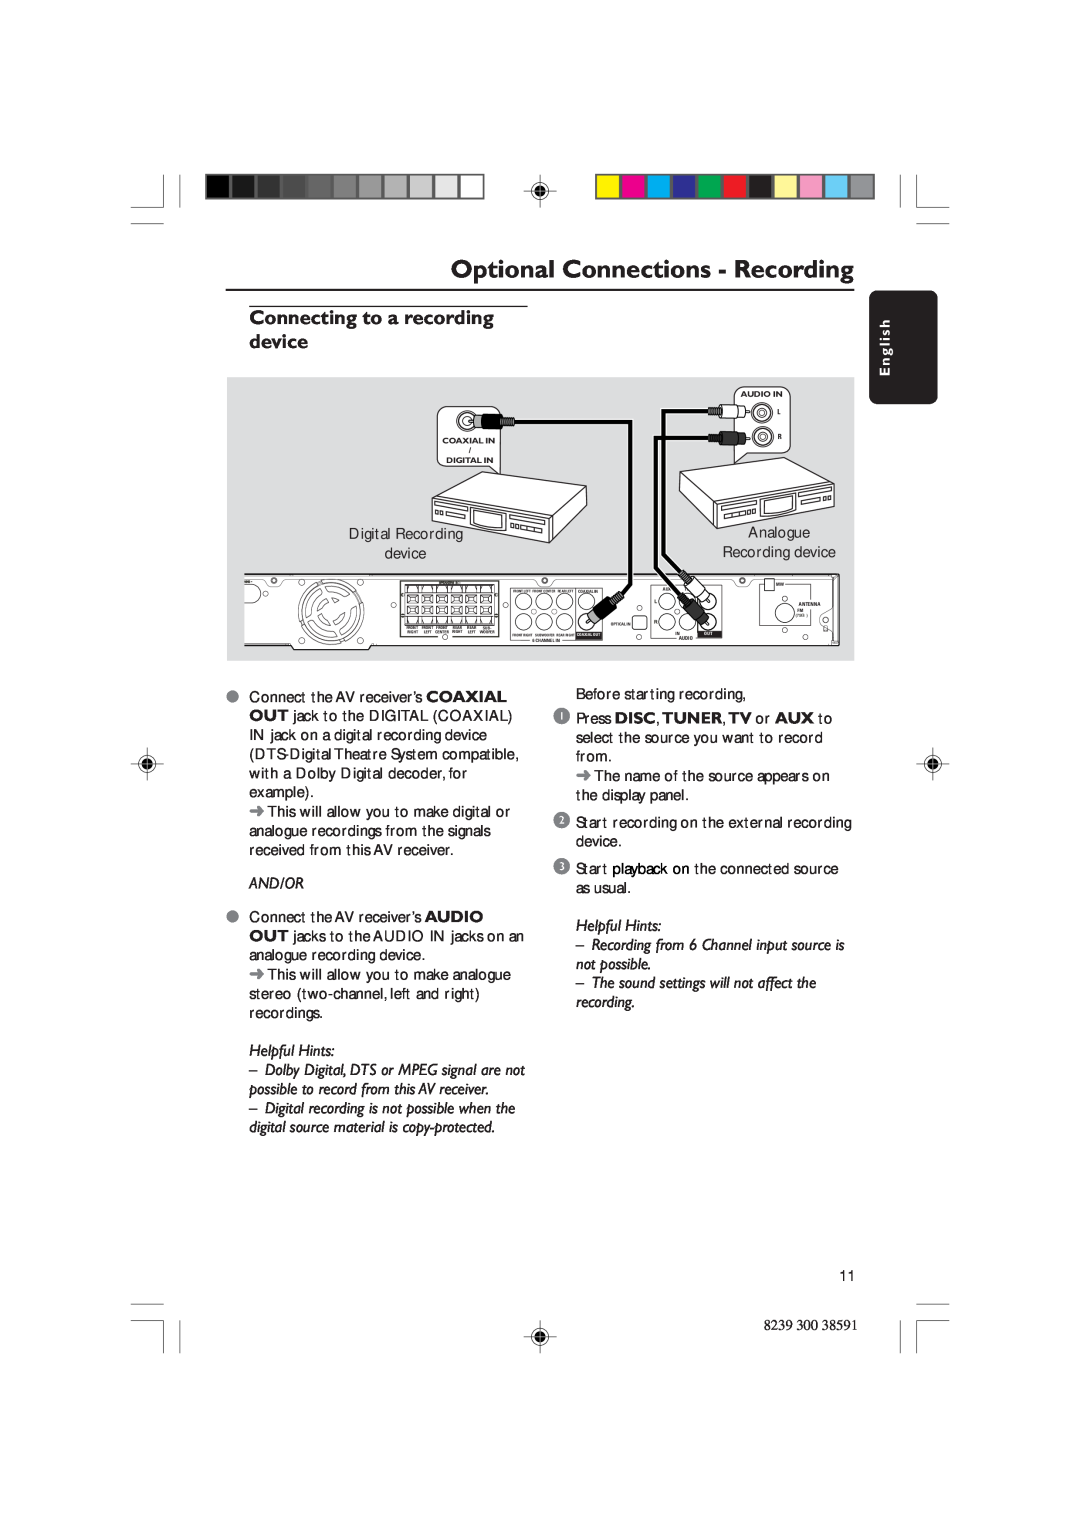 Philips HTR5000 user manual Optional Connections - Recording, Connecting to a recording device, And/Or, Helpful Hints 